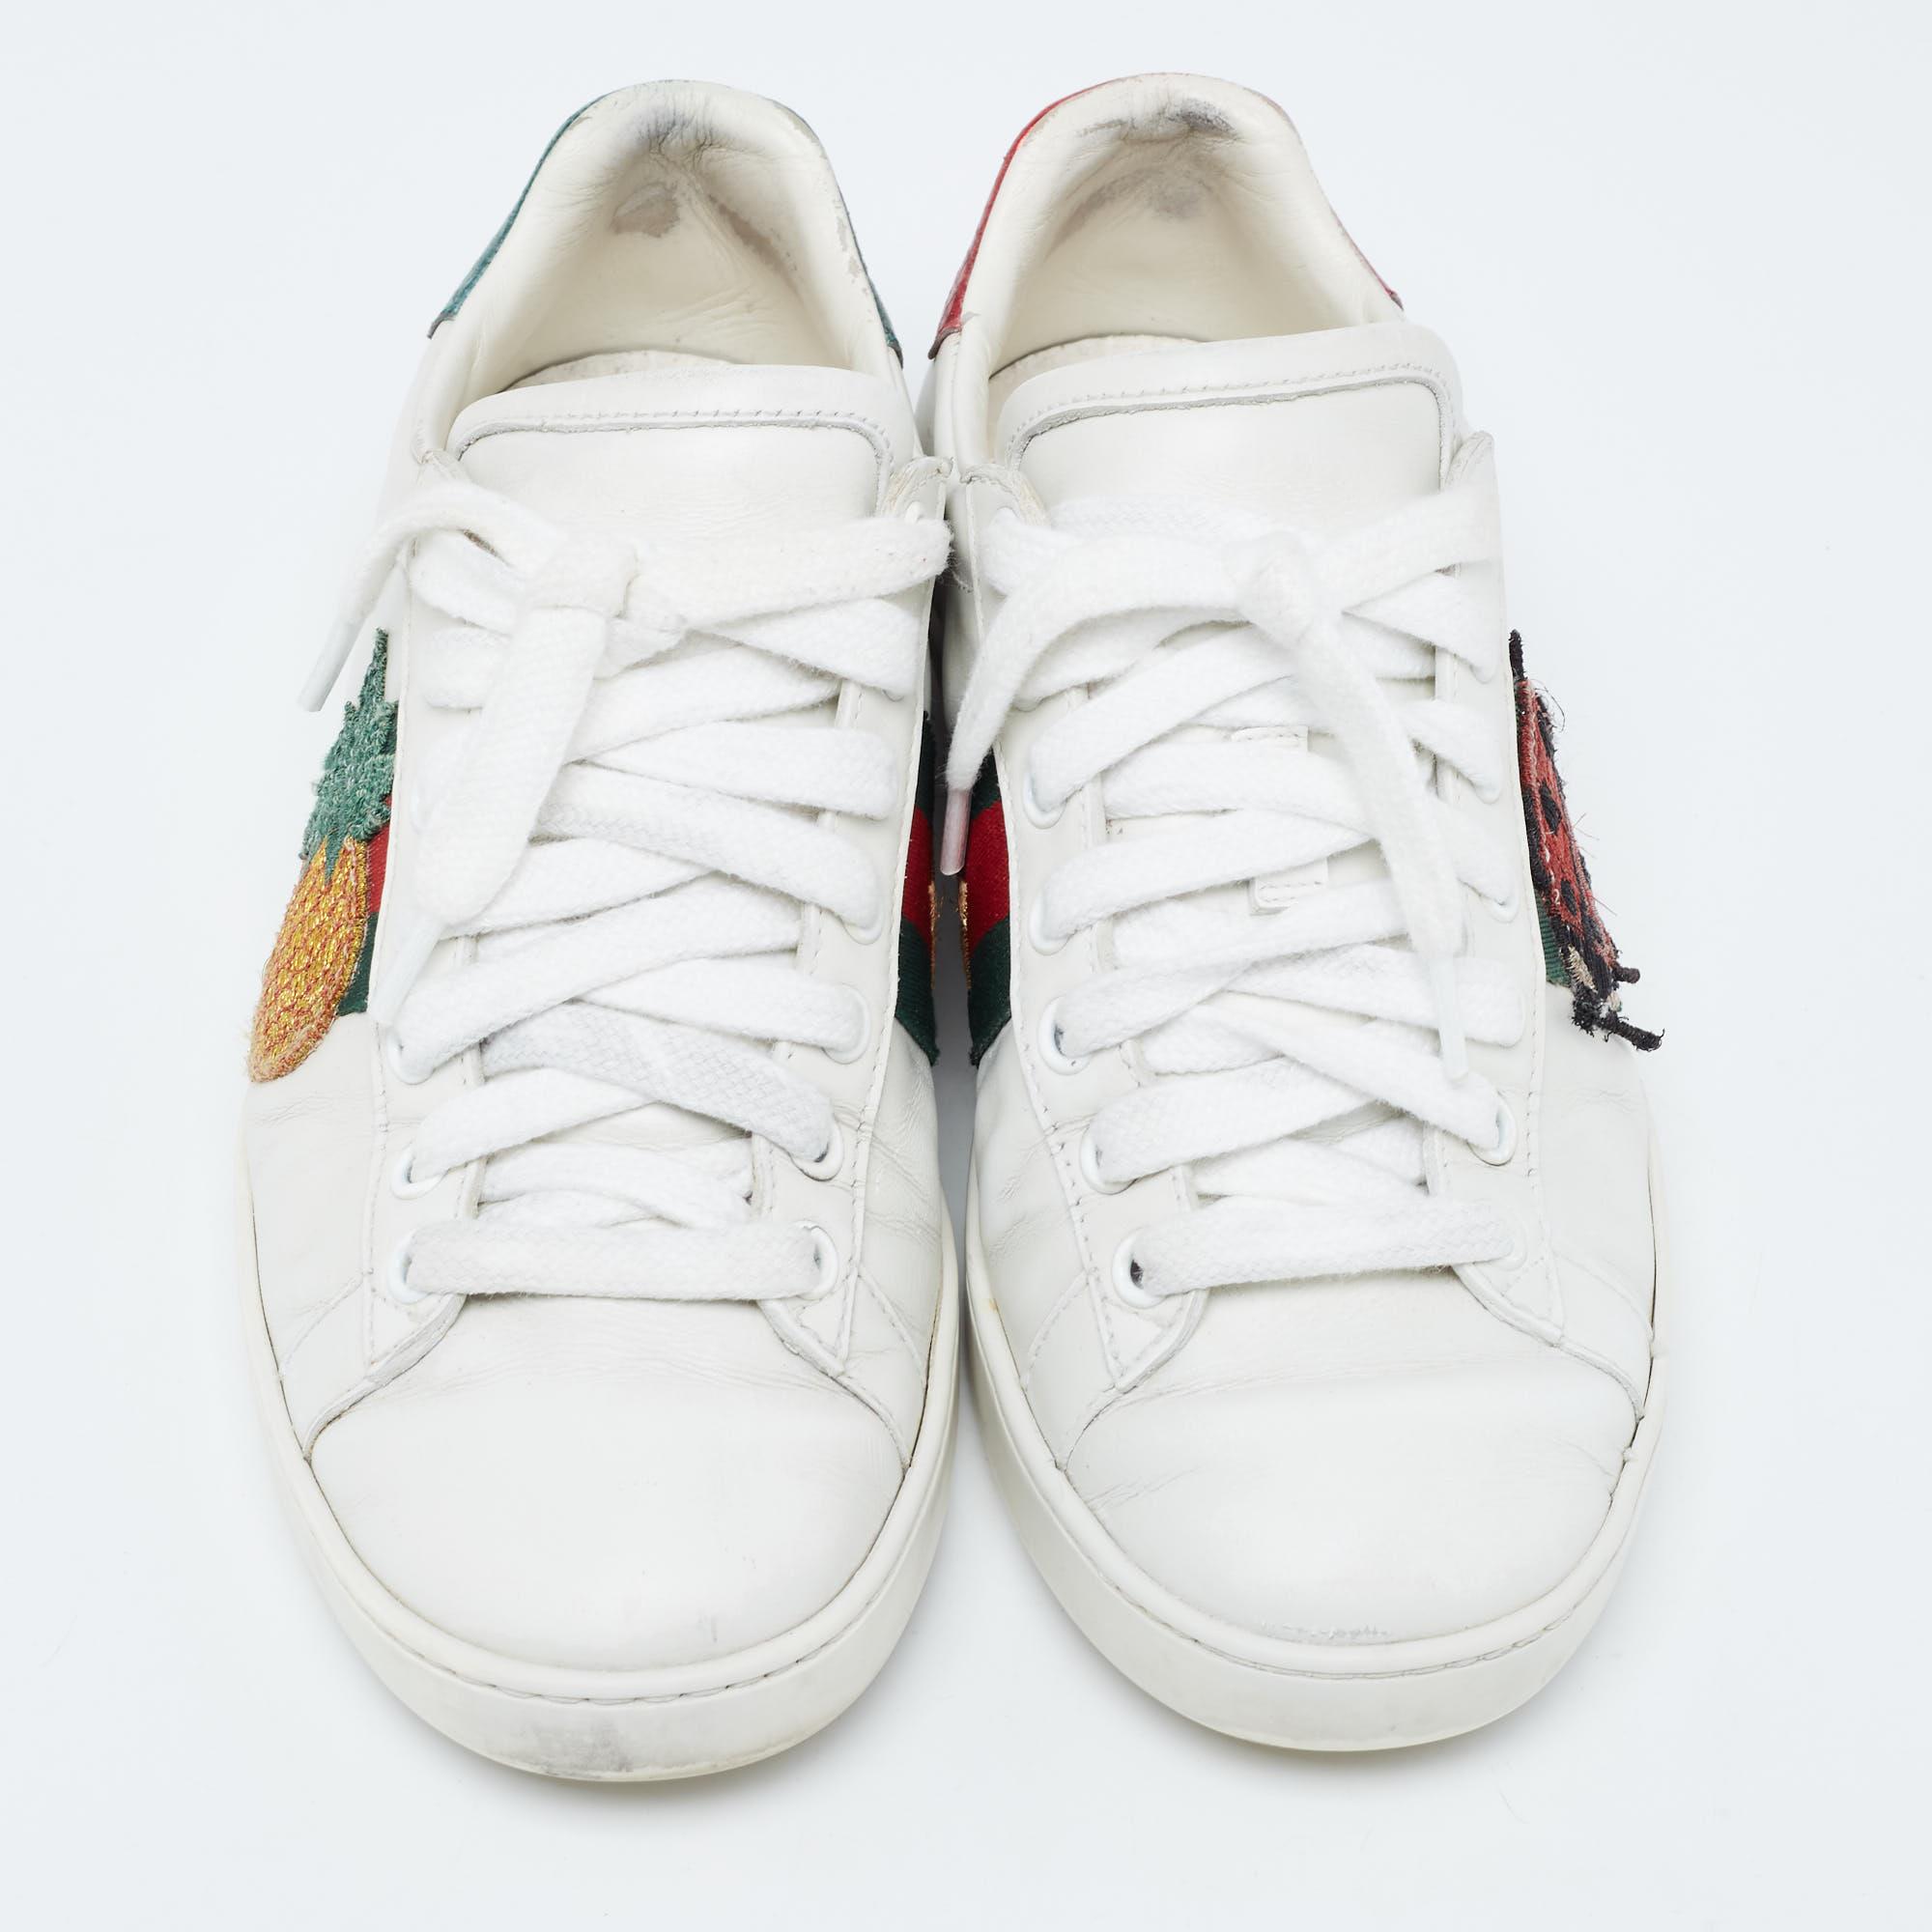 Gucci White Leather Web Ace Sneakers Size 34.5